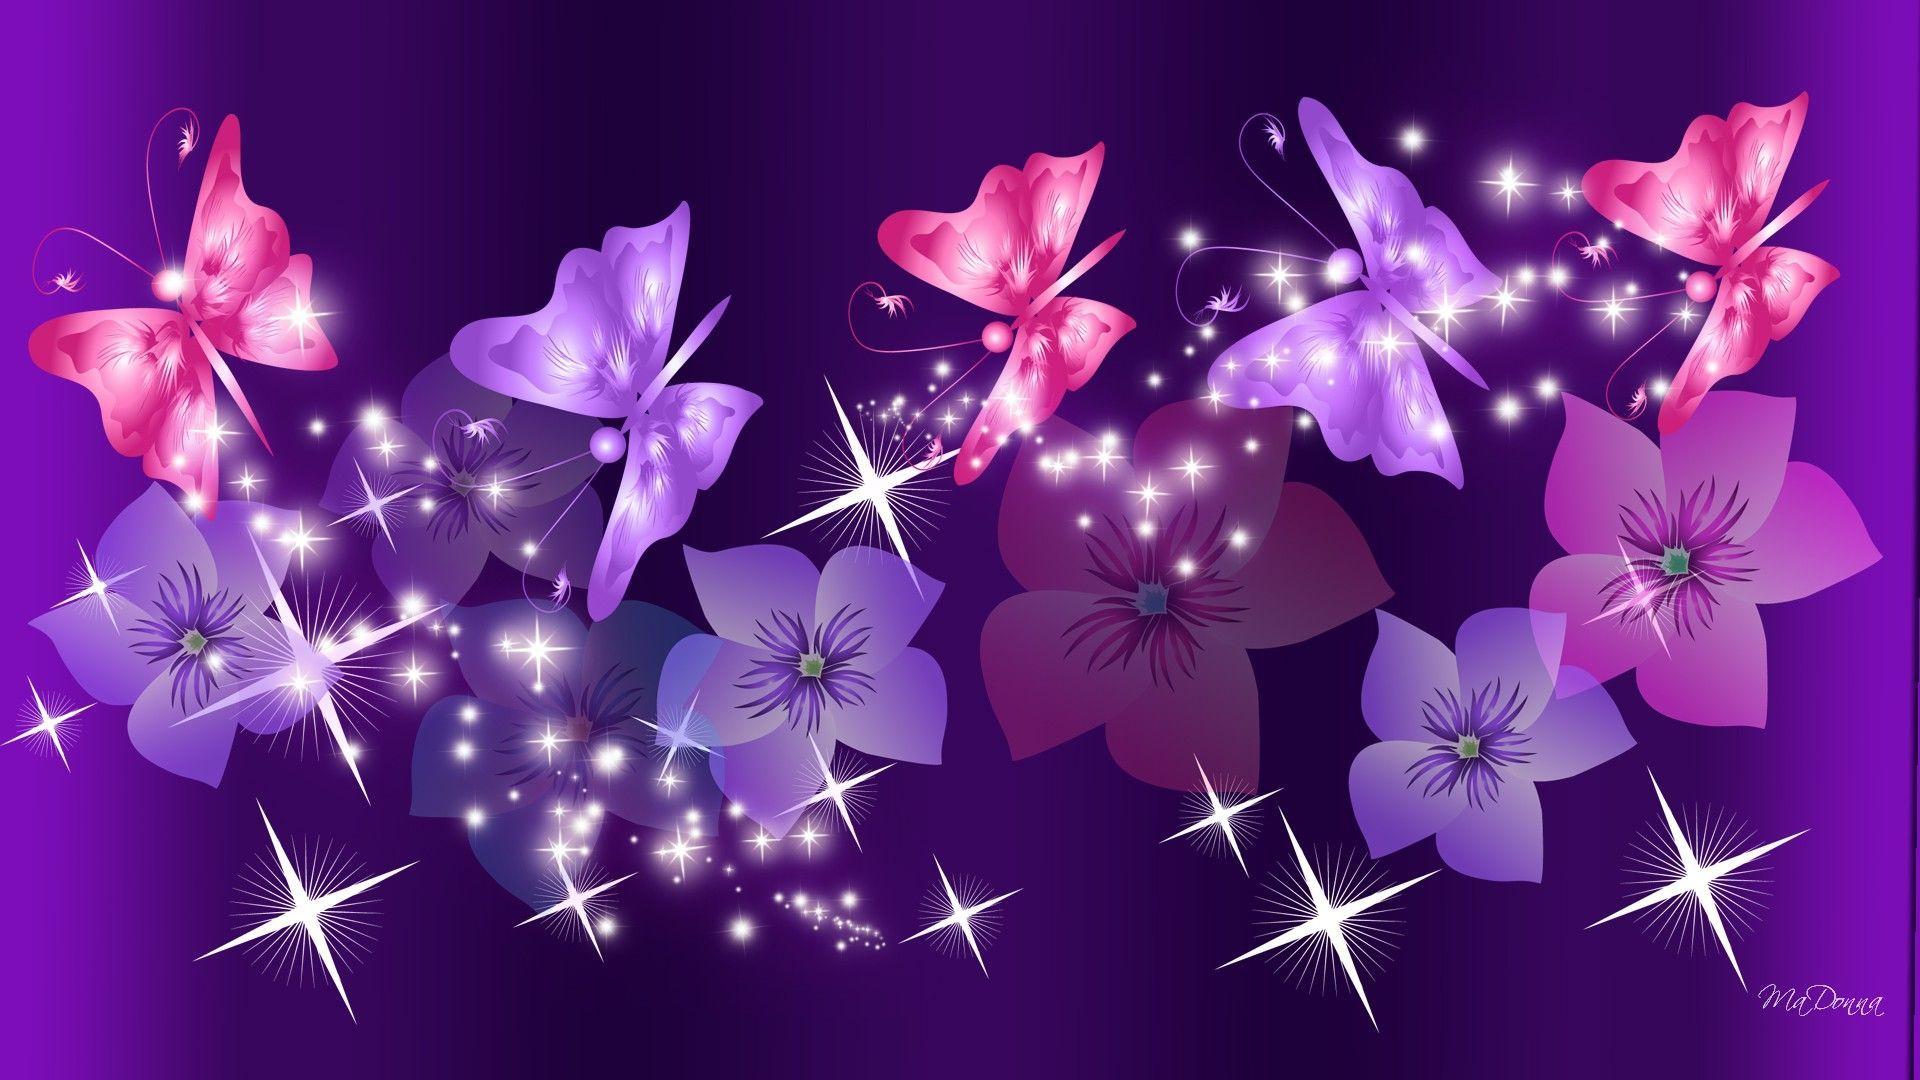 Wallpaper For > Pink And Purple Wallpaper